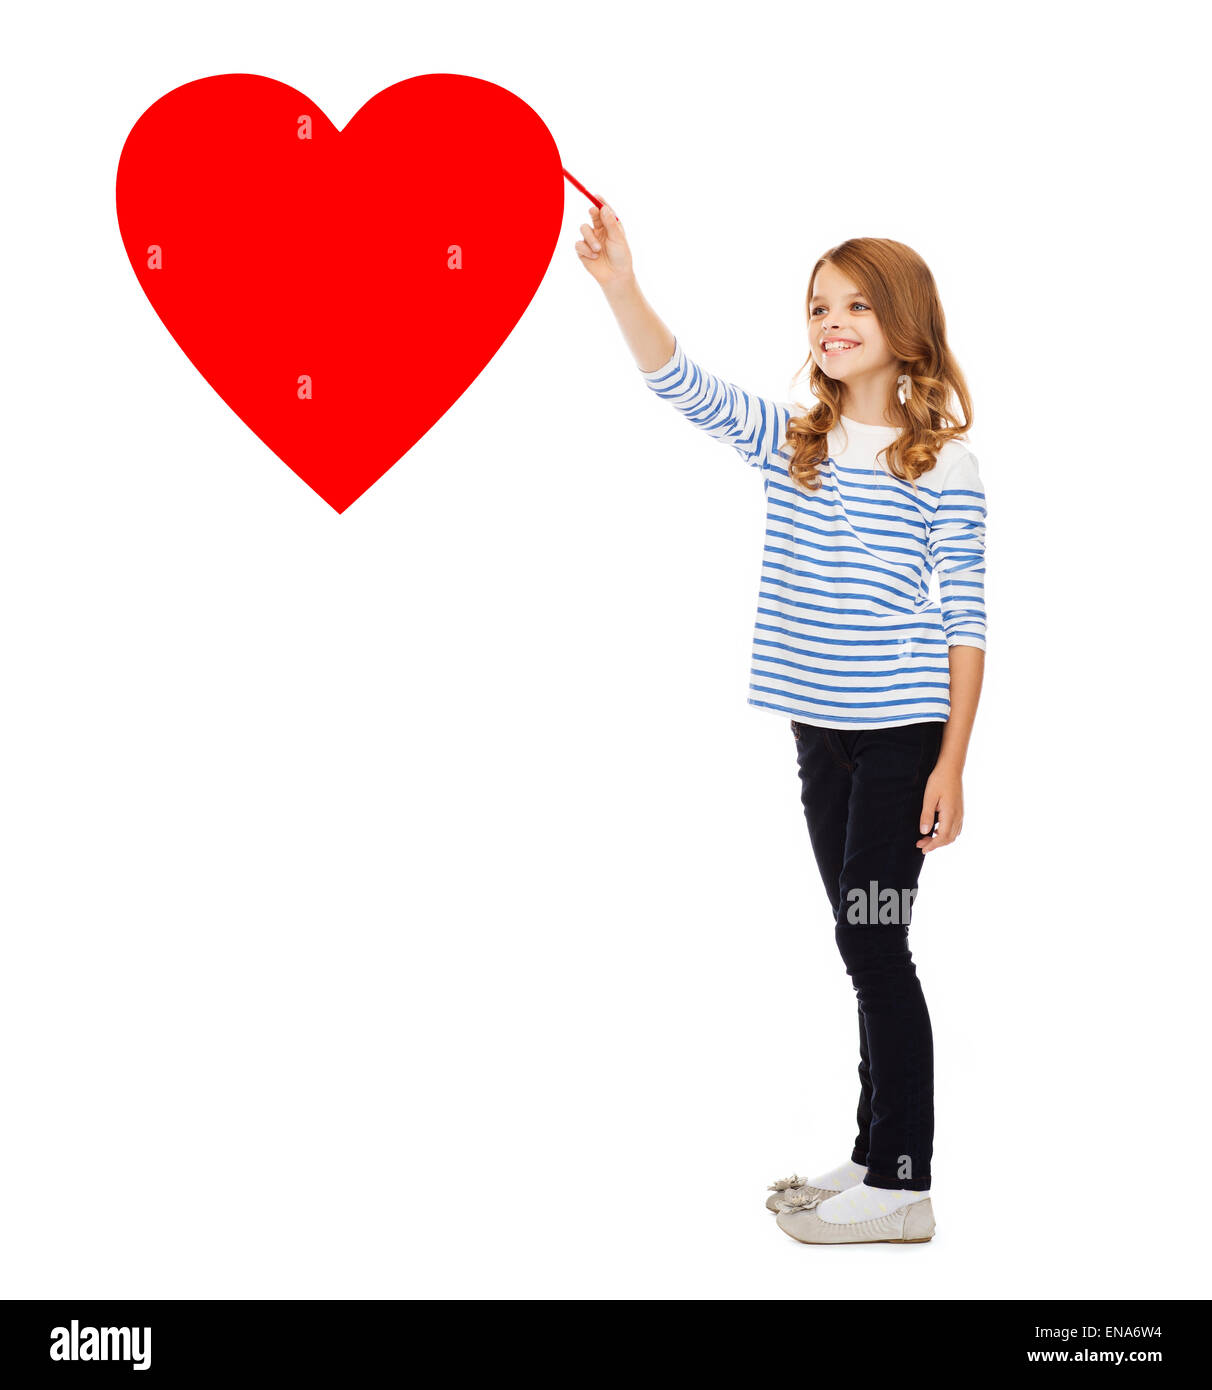 Red Heart Stock Photos and Images - 123RF